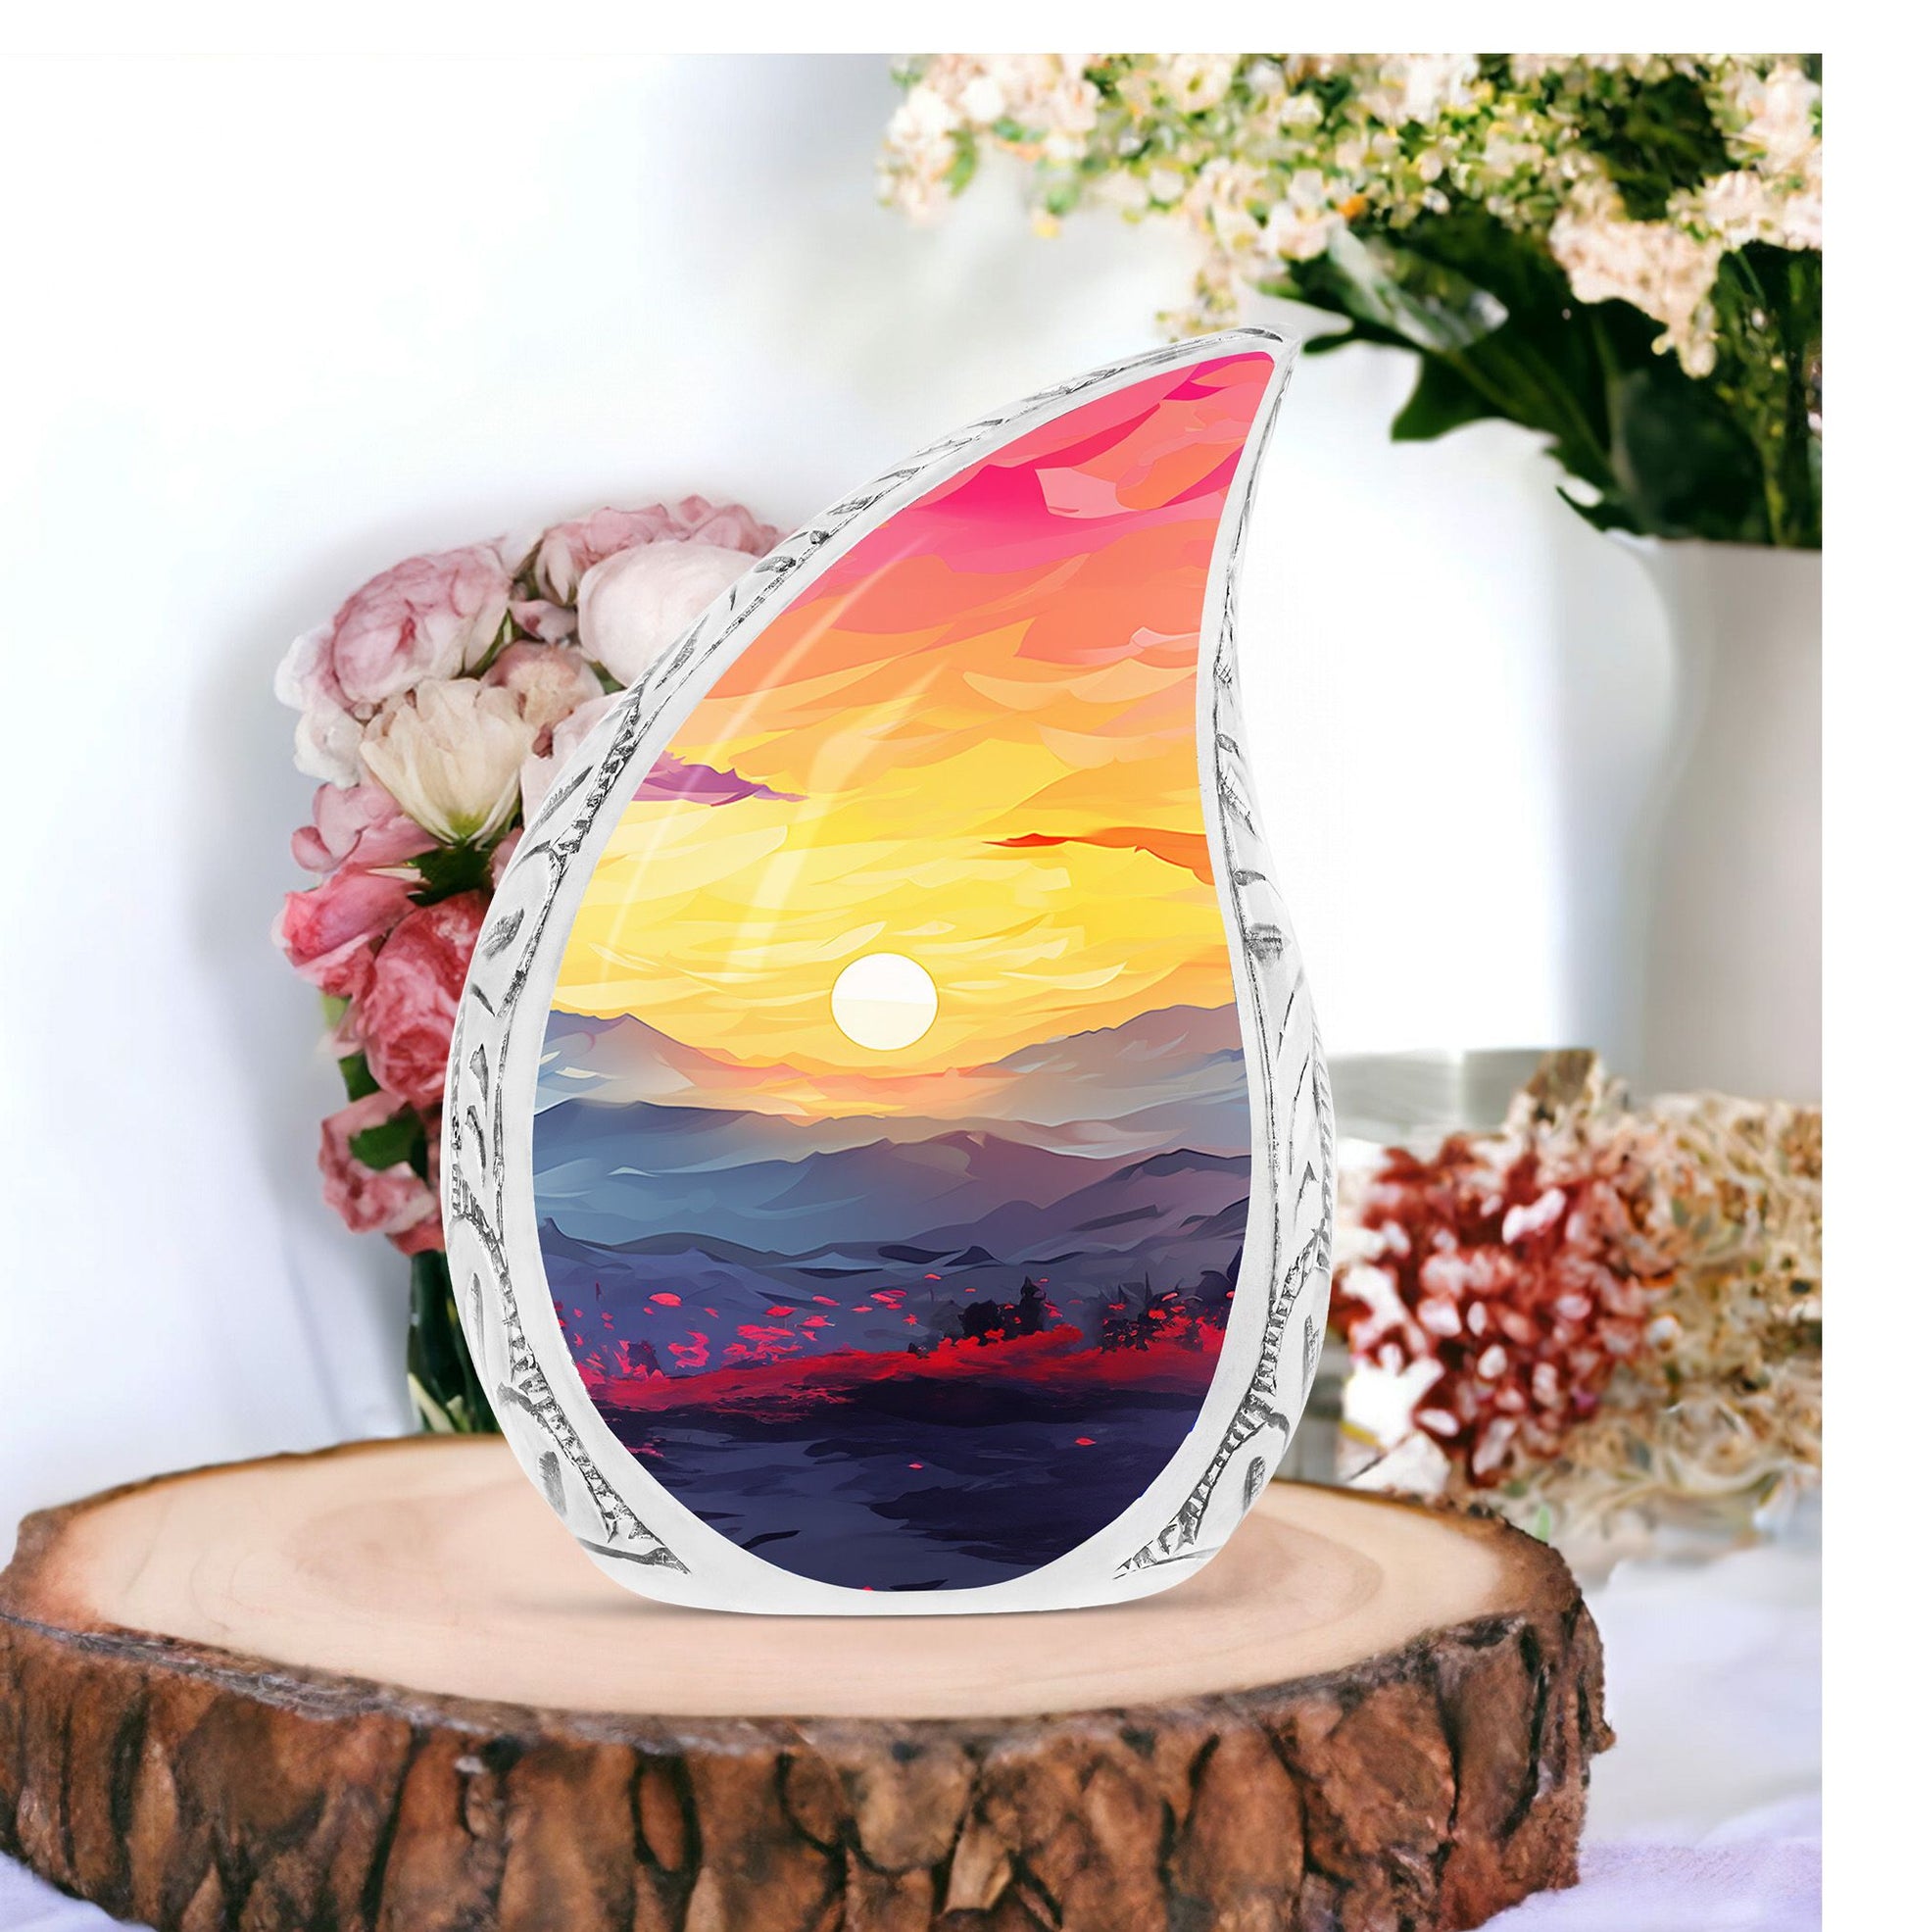 Teardrop style Mountains Urn for male burial, a unique and decorative gift for women. Cremation urn made of metal.